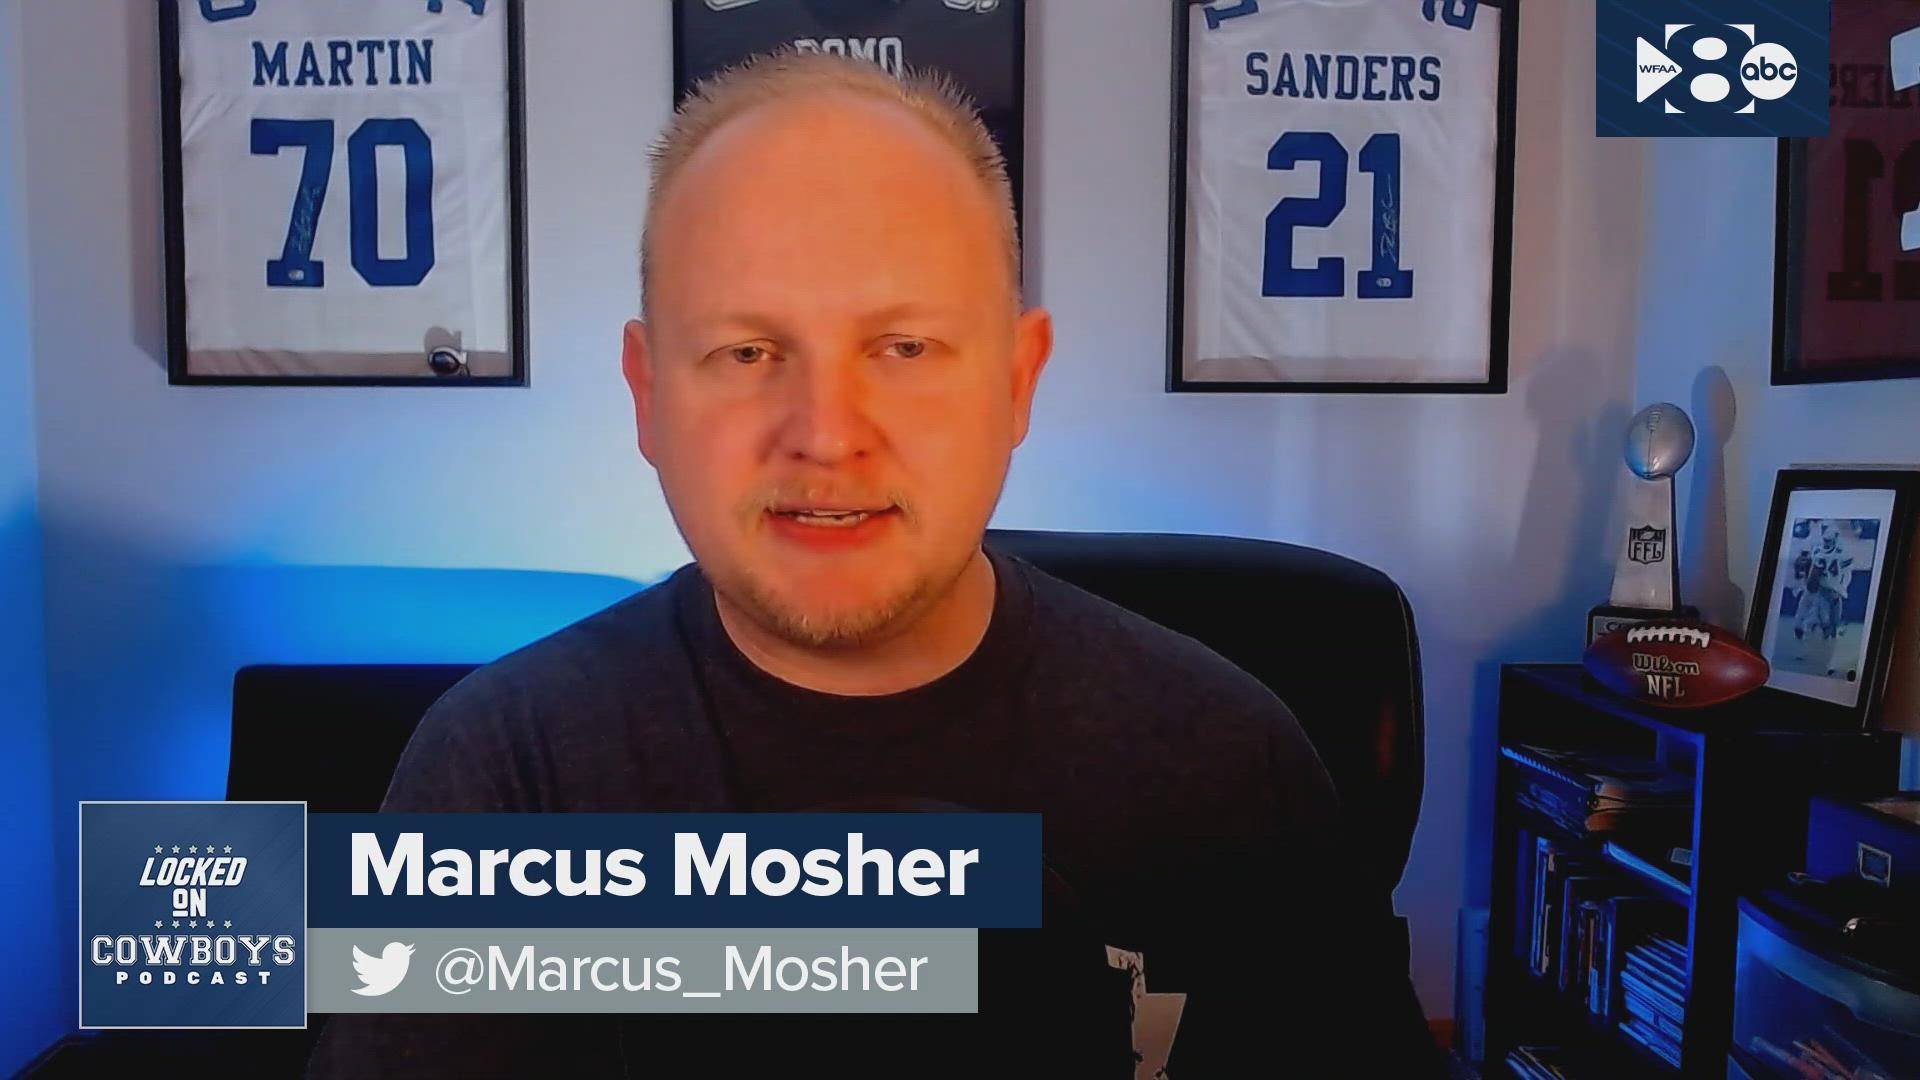 The Cowboys are likely to release Amari Cooper soon. What happens now? @Marcus_Mosher talks about it ahead of a new episode of Locked On Cowboys.